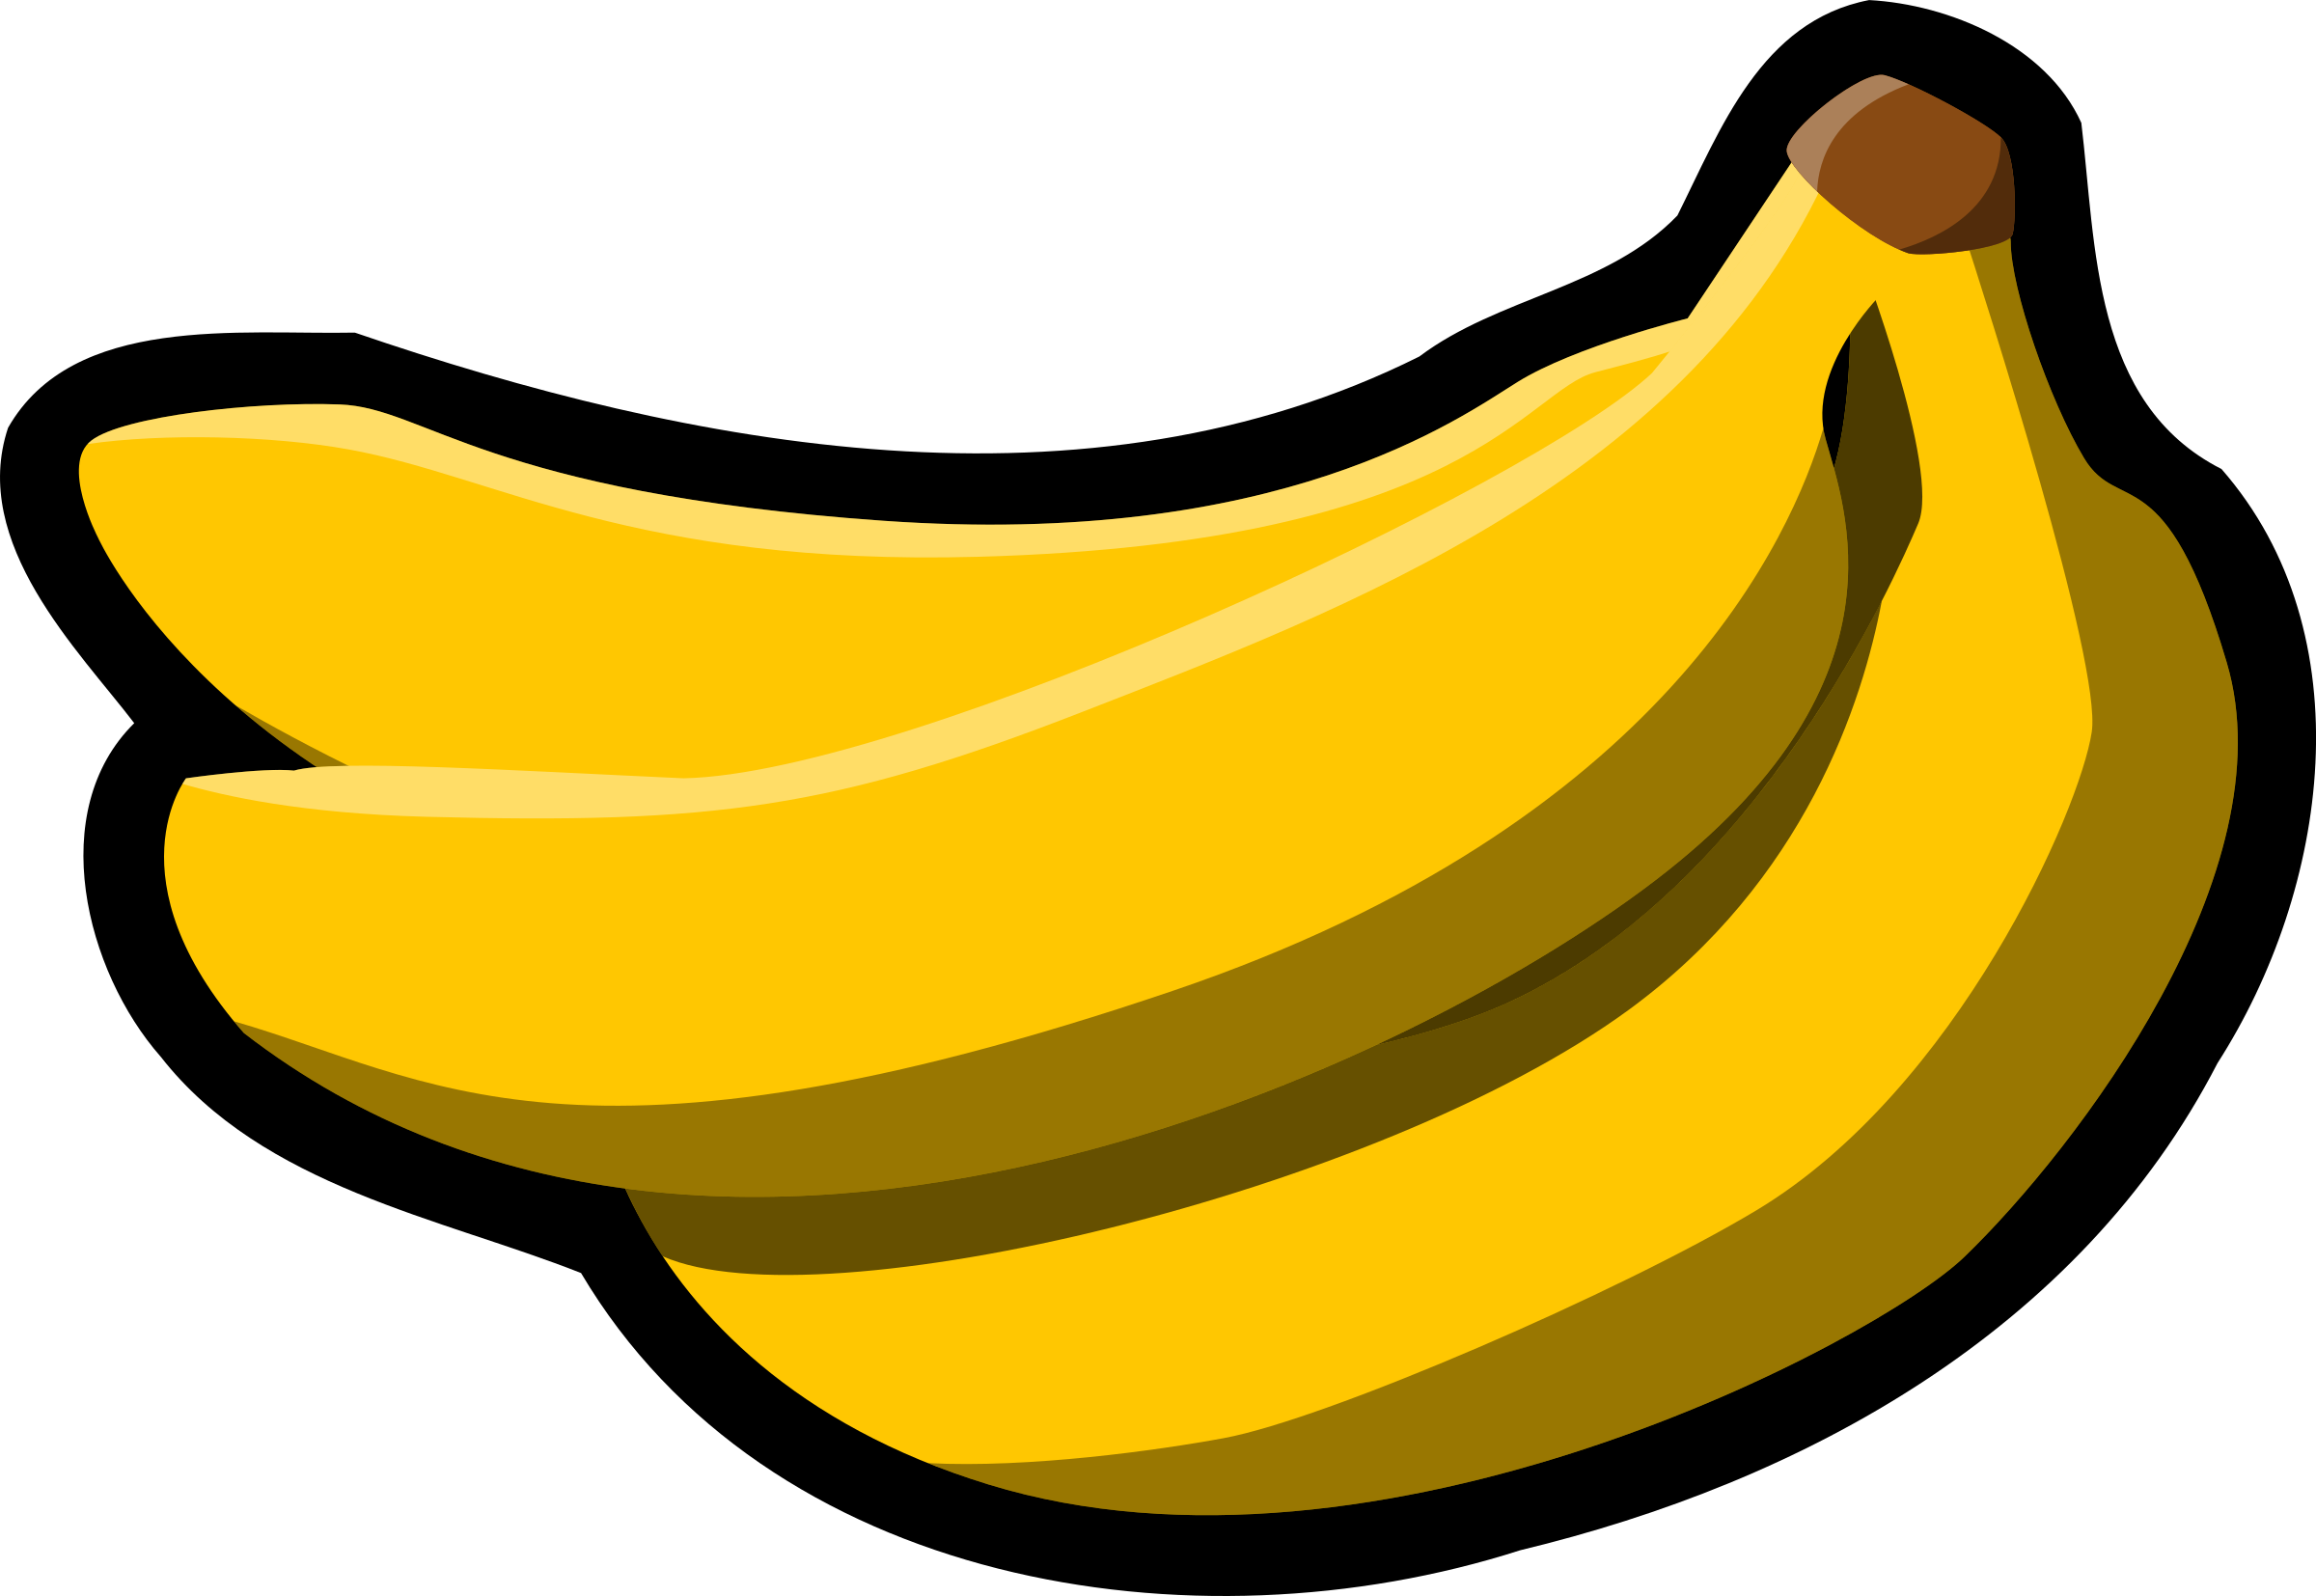 A Bunch Of Yellow Fresh Bananas Laid Down To The Side, A String, Down, Side  PNG Transparent Image and Clipart for Free Download